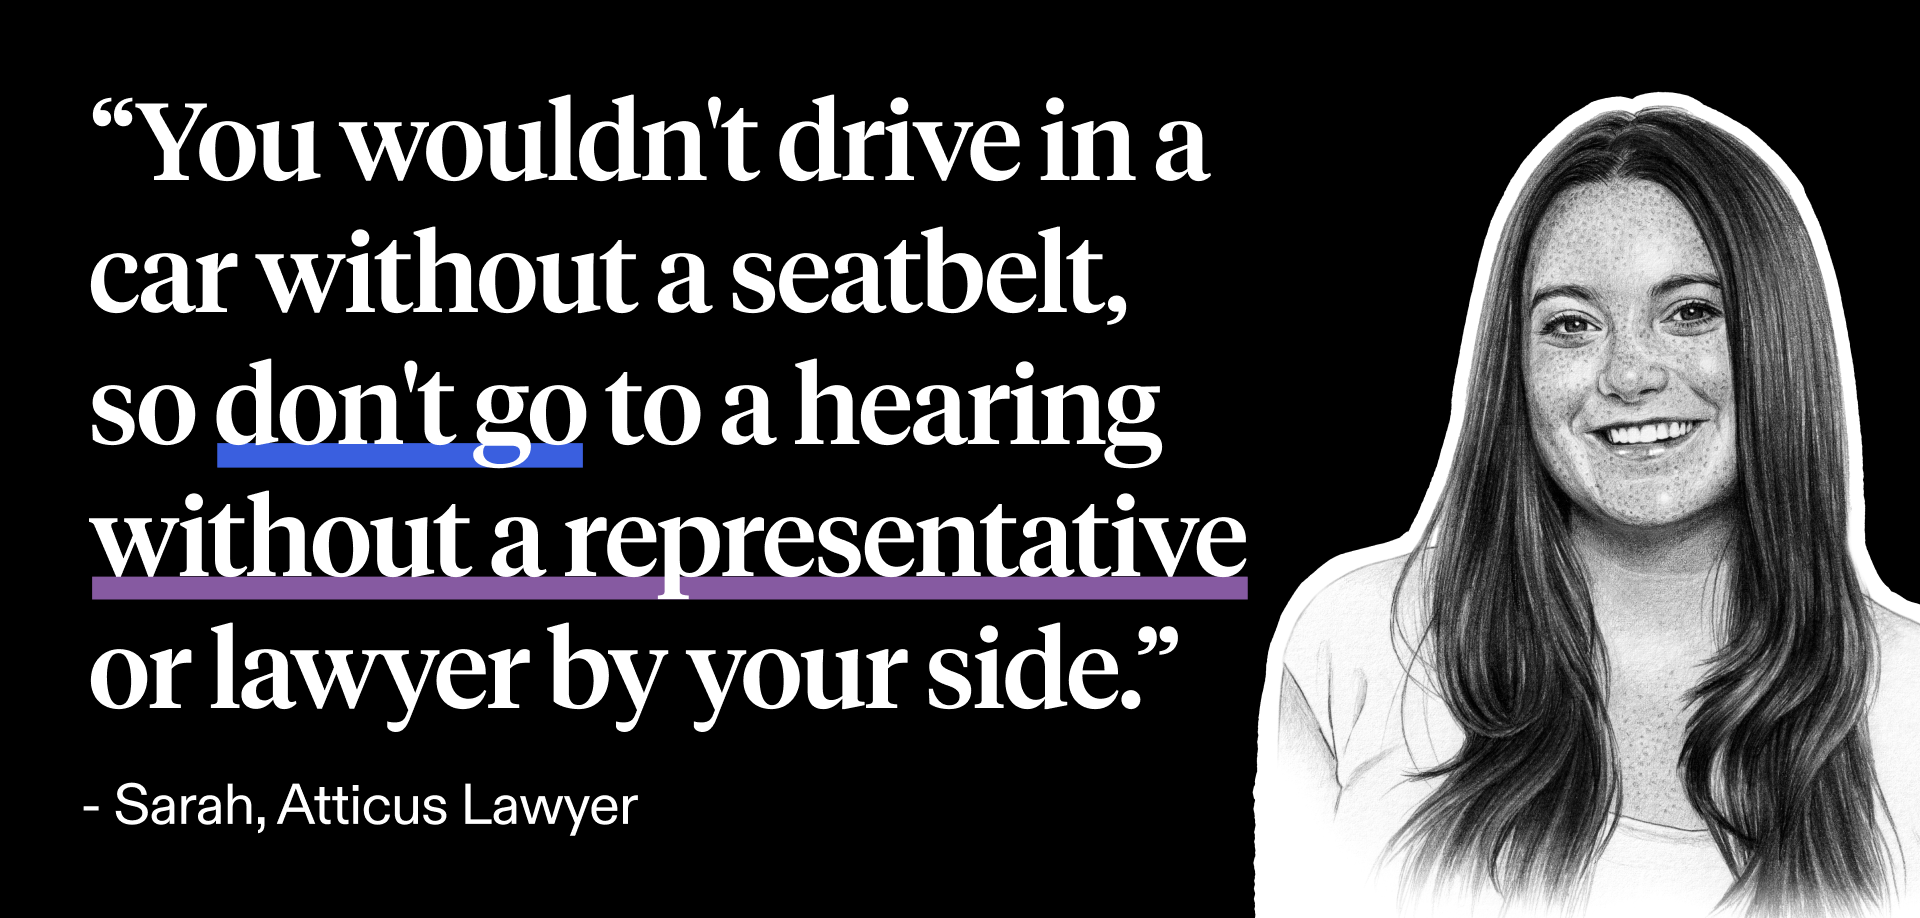 Sarah, a lawyer at Atticus, shares this analogy about needing a disability lawyer for a hearing: "You wouldn't drive a car without a seatbelt, so don't go to a hearing without a representative by your side."